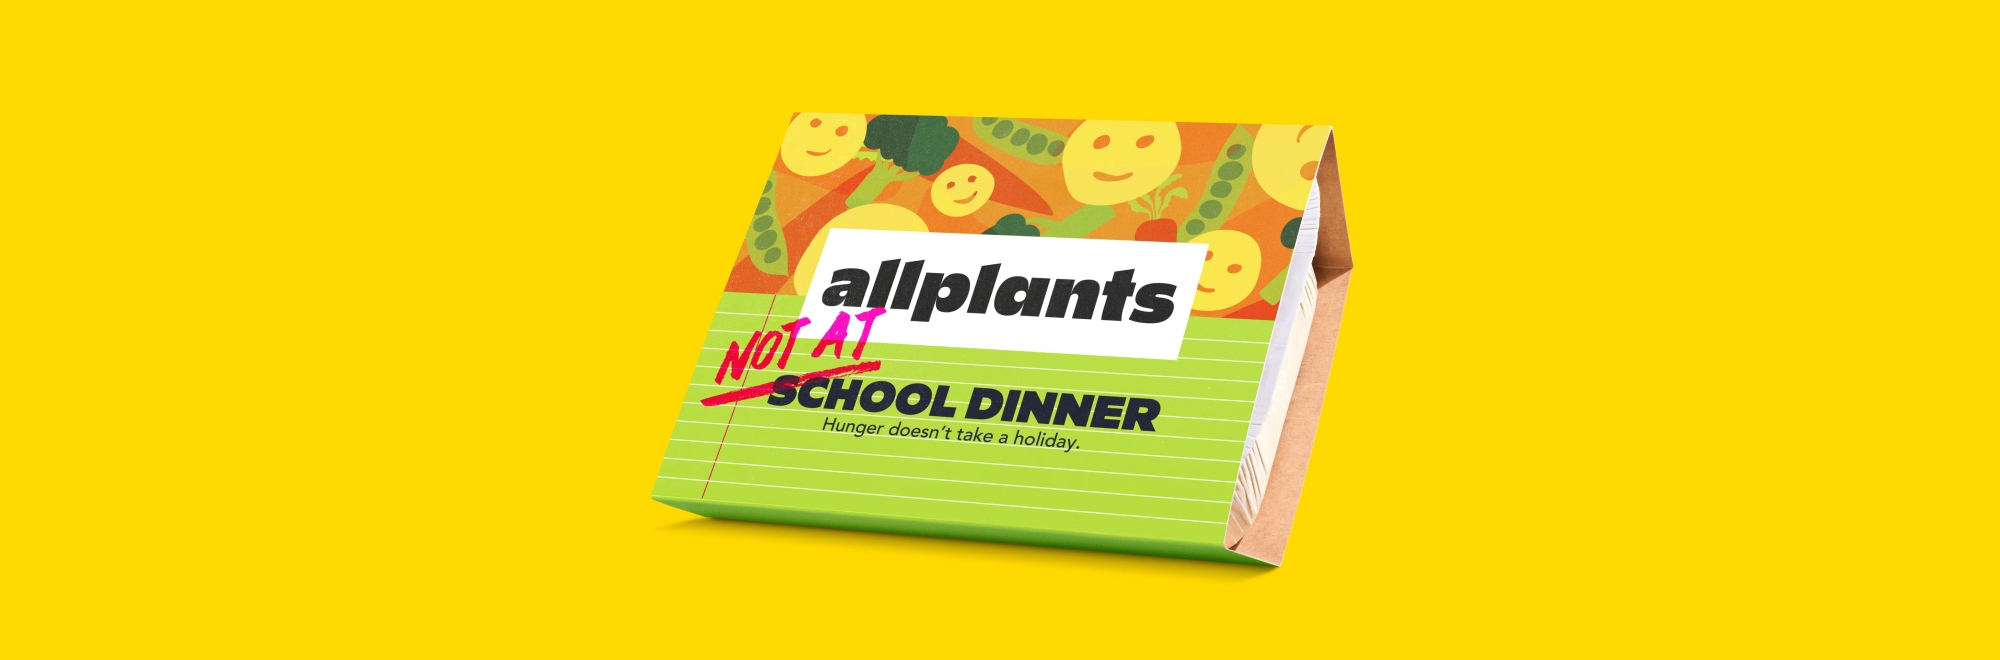 allplants & Uncommon help feed hungry kids with (Not at) School Dinners during half term